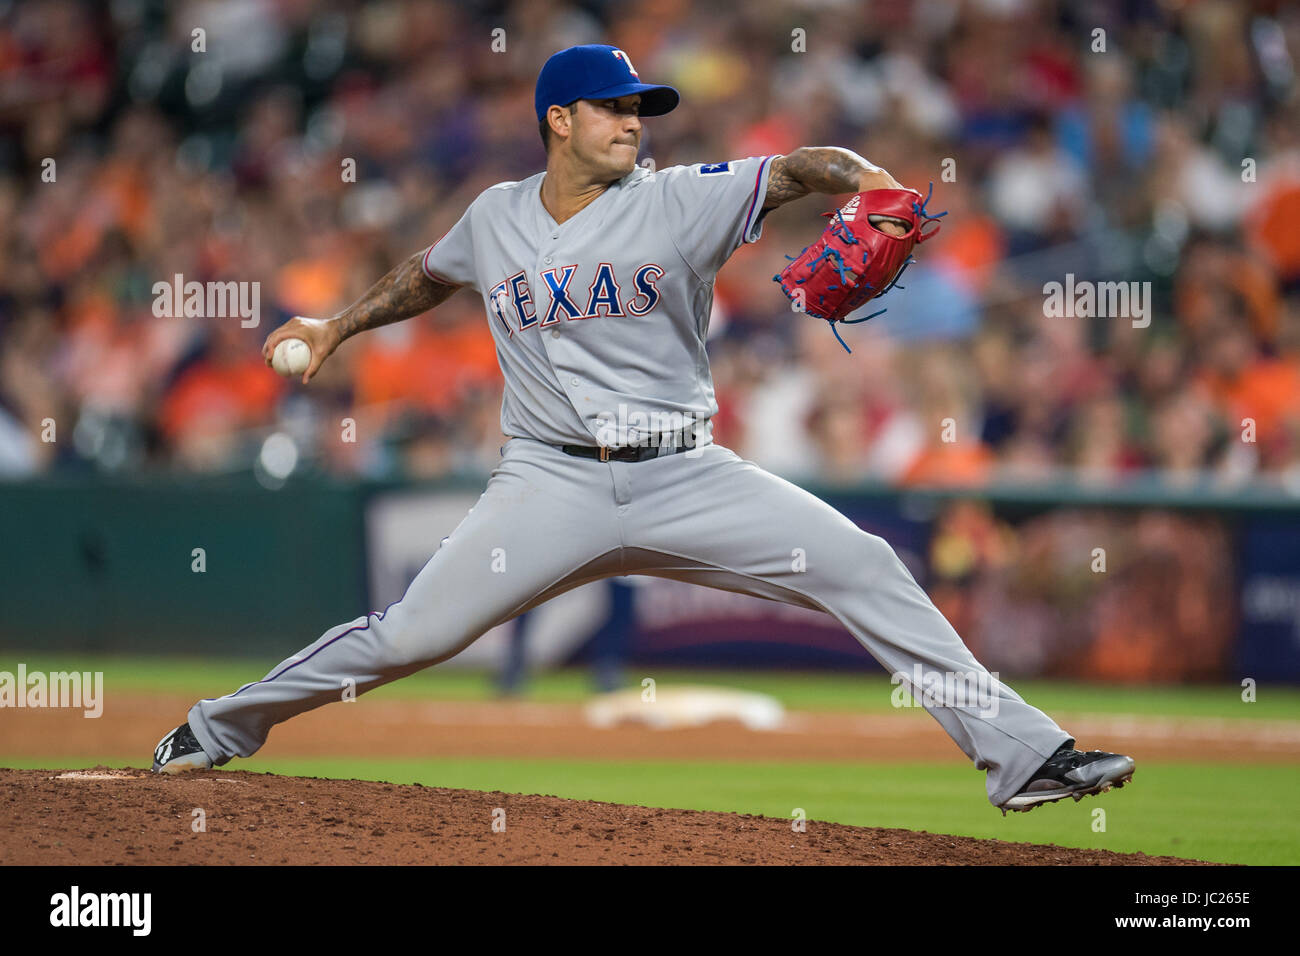 Houston, TX, USA. 13th June, 2017. Texas Rangers relief pitcher Matt Bush  (51) pitches during a Major League Baseball game between the Houston Astros  and the Texas Rangers at Minute Maid Park